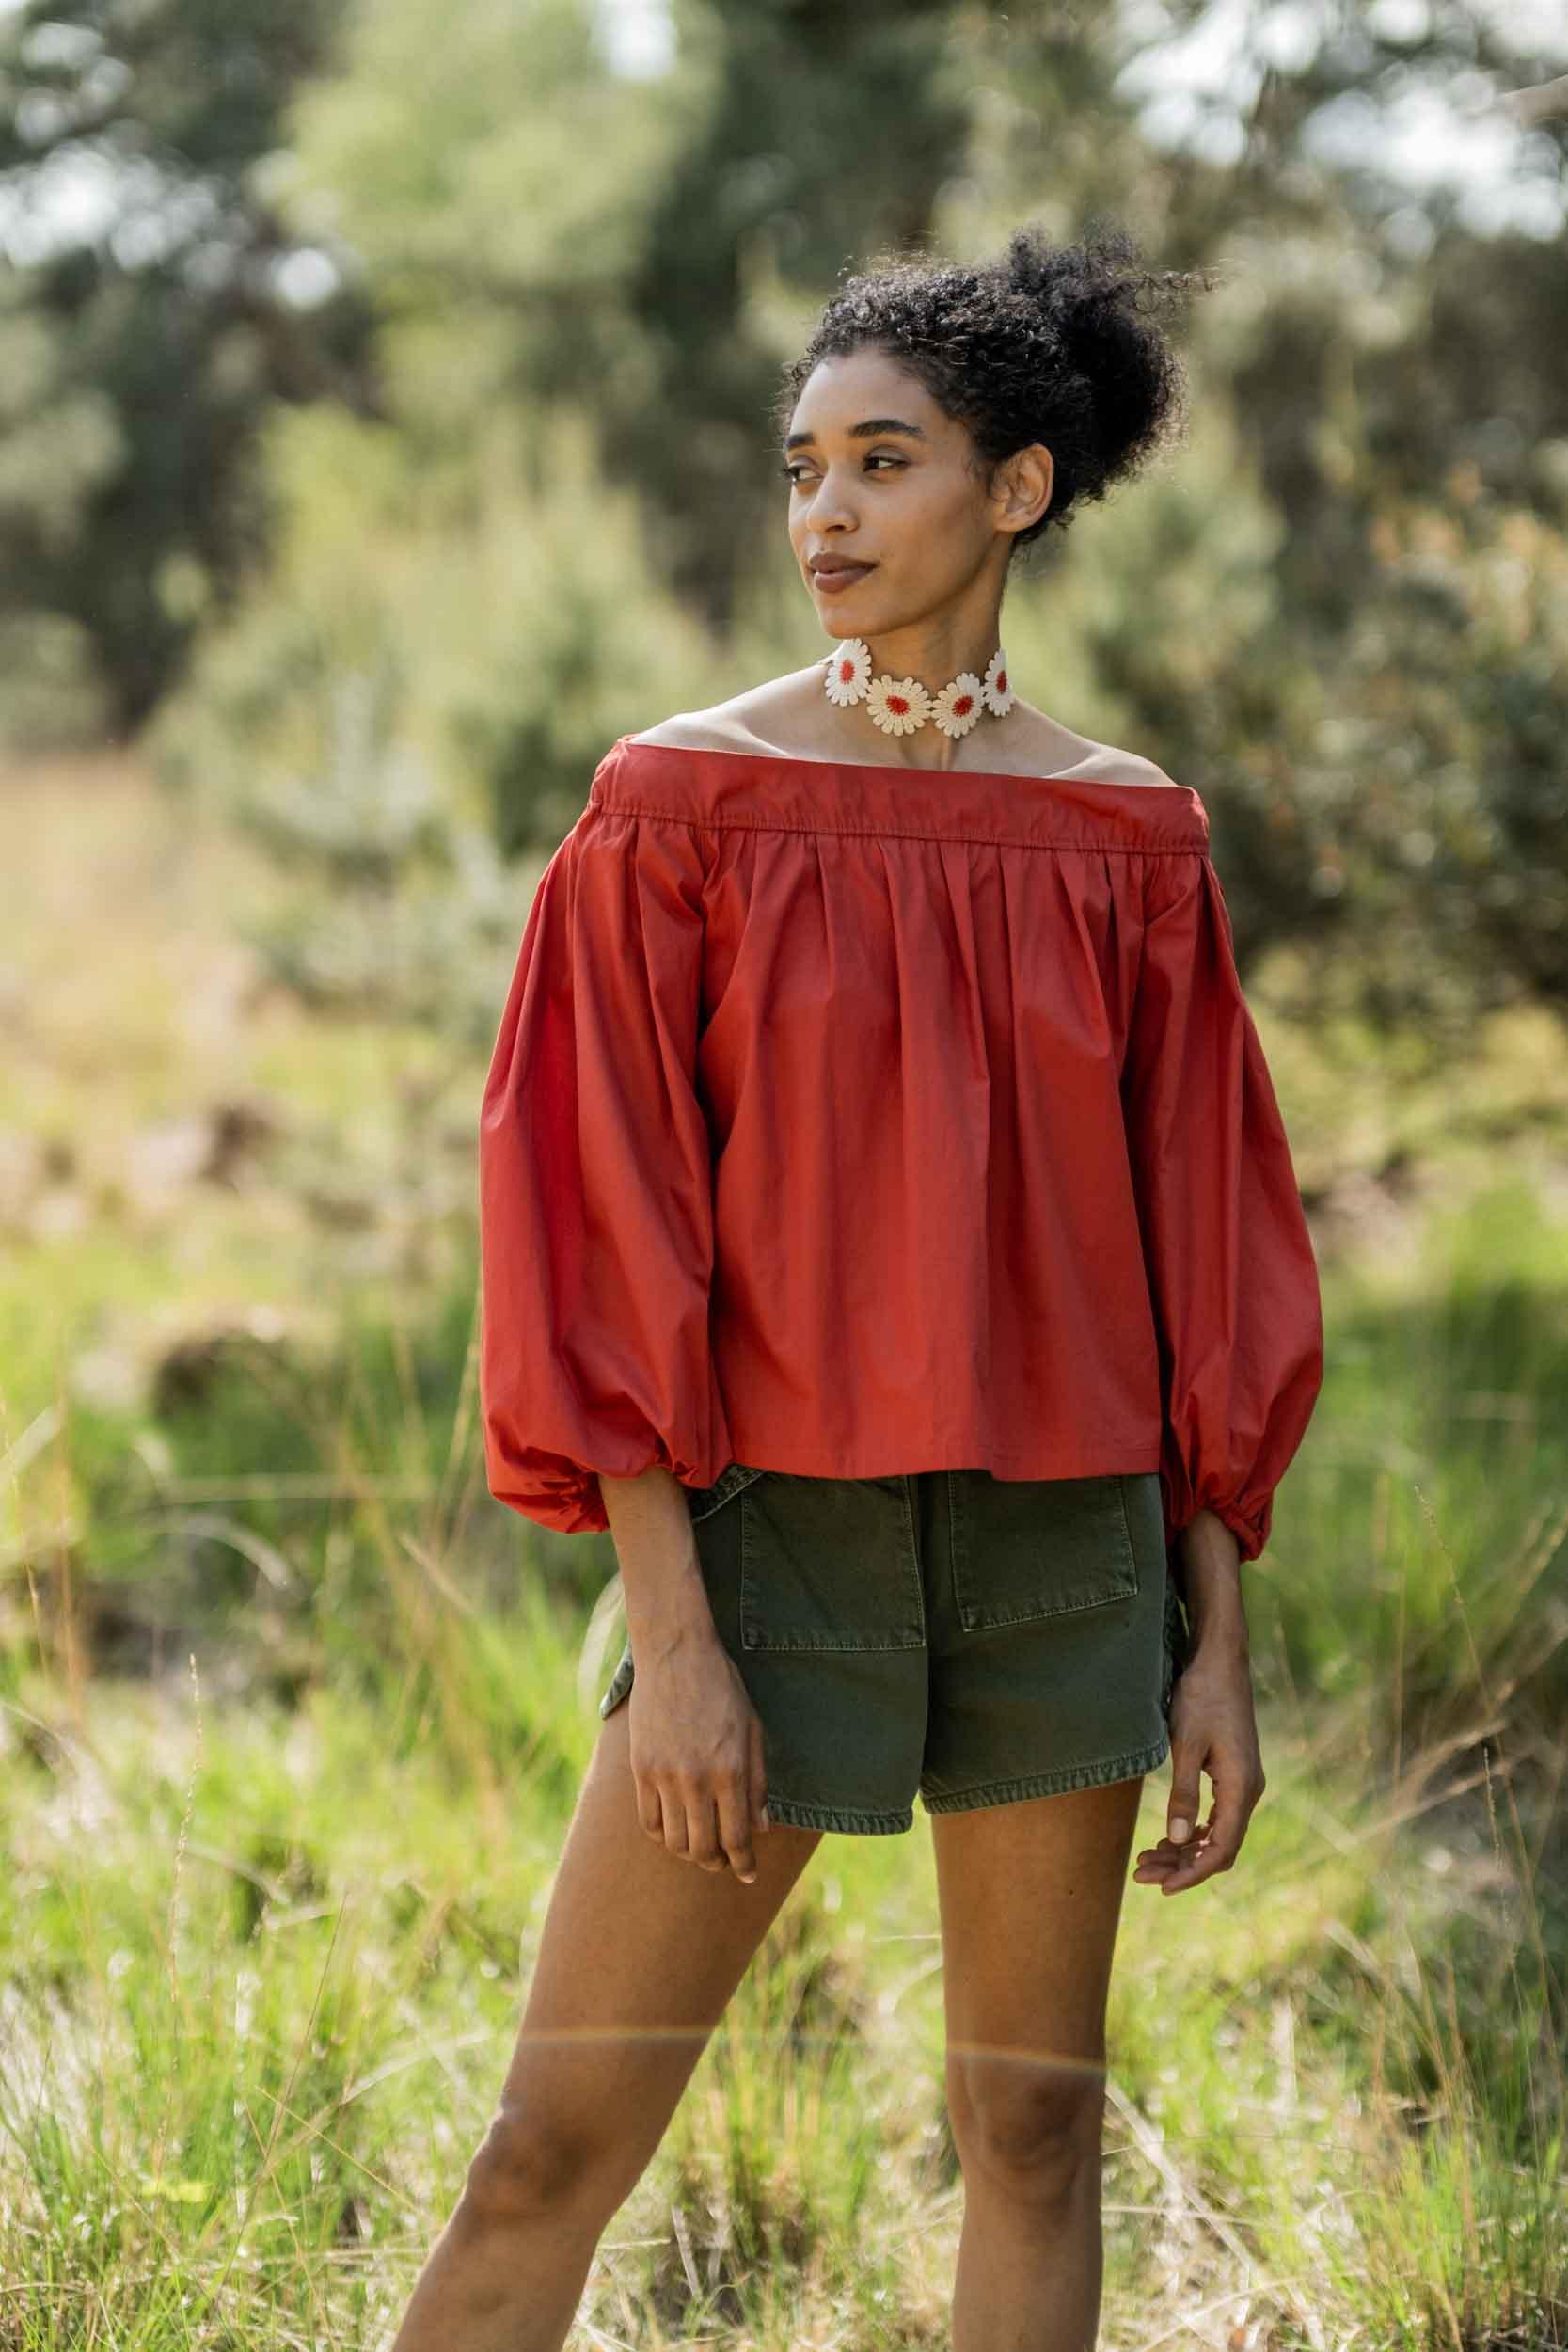 Woman wearing the Lia Top sewing pattern from Fibre Mood on The Fold Line. A top pattern made in silk satin, double gauze, viscose crepe, or muslin fabrics, featuring an off-the-shoulder silhouette, fitted above the bust then gathered with knife pleats, sleeves have a curved hemline being shorter at the front.